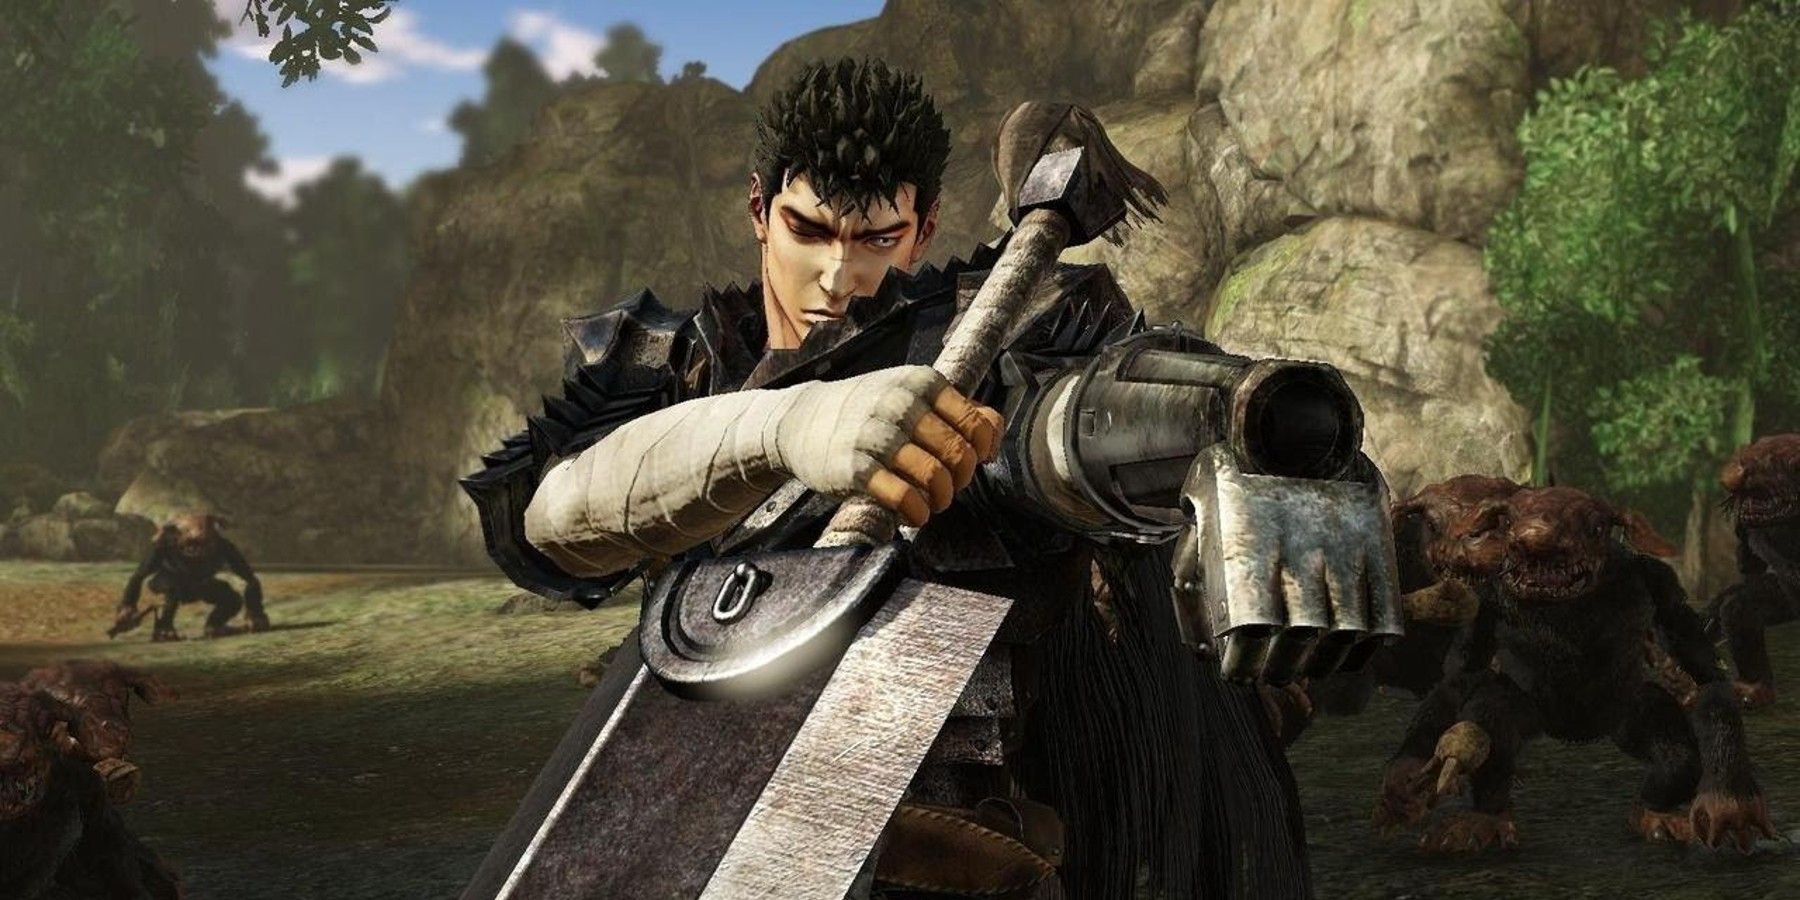 Soulstice gameplay trailer is giving me some serious Berserk vibes